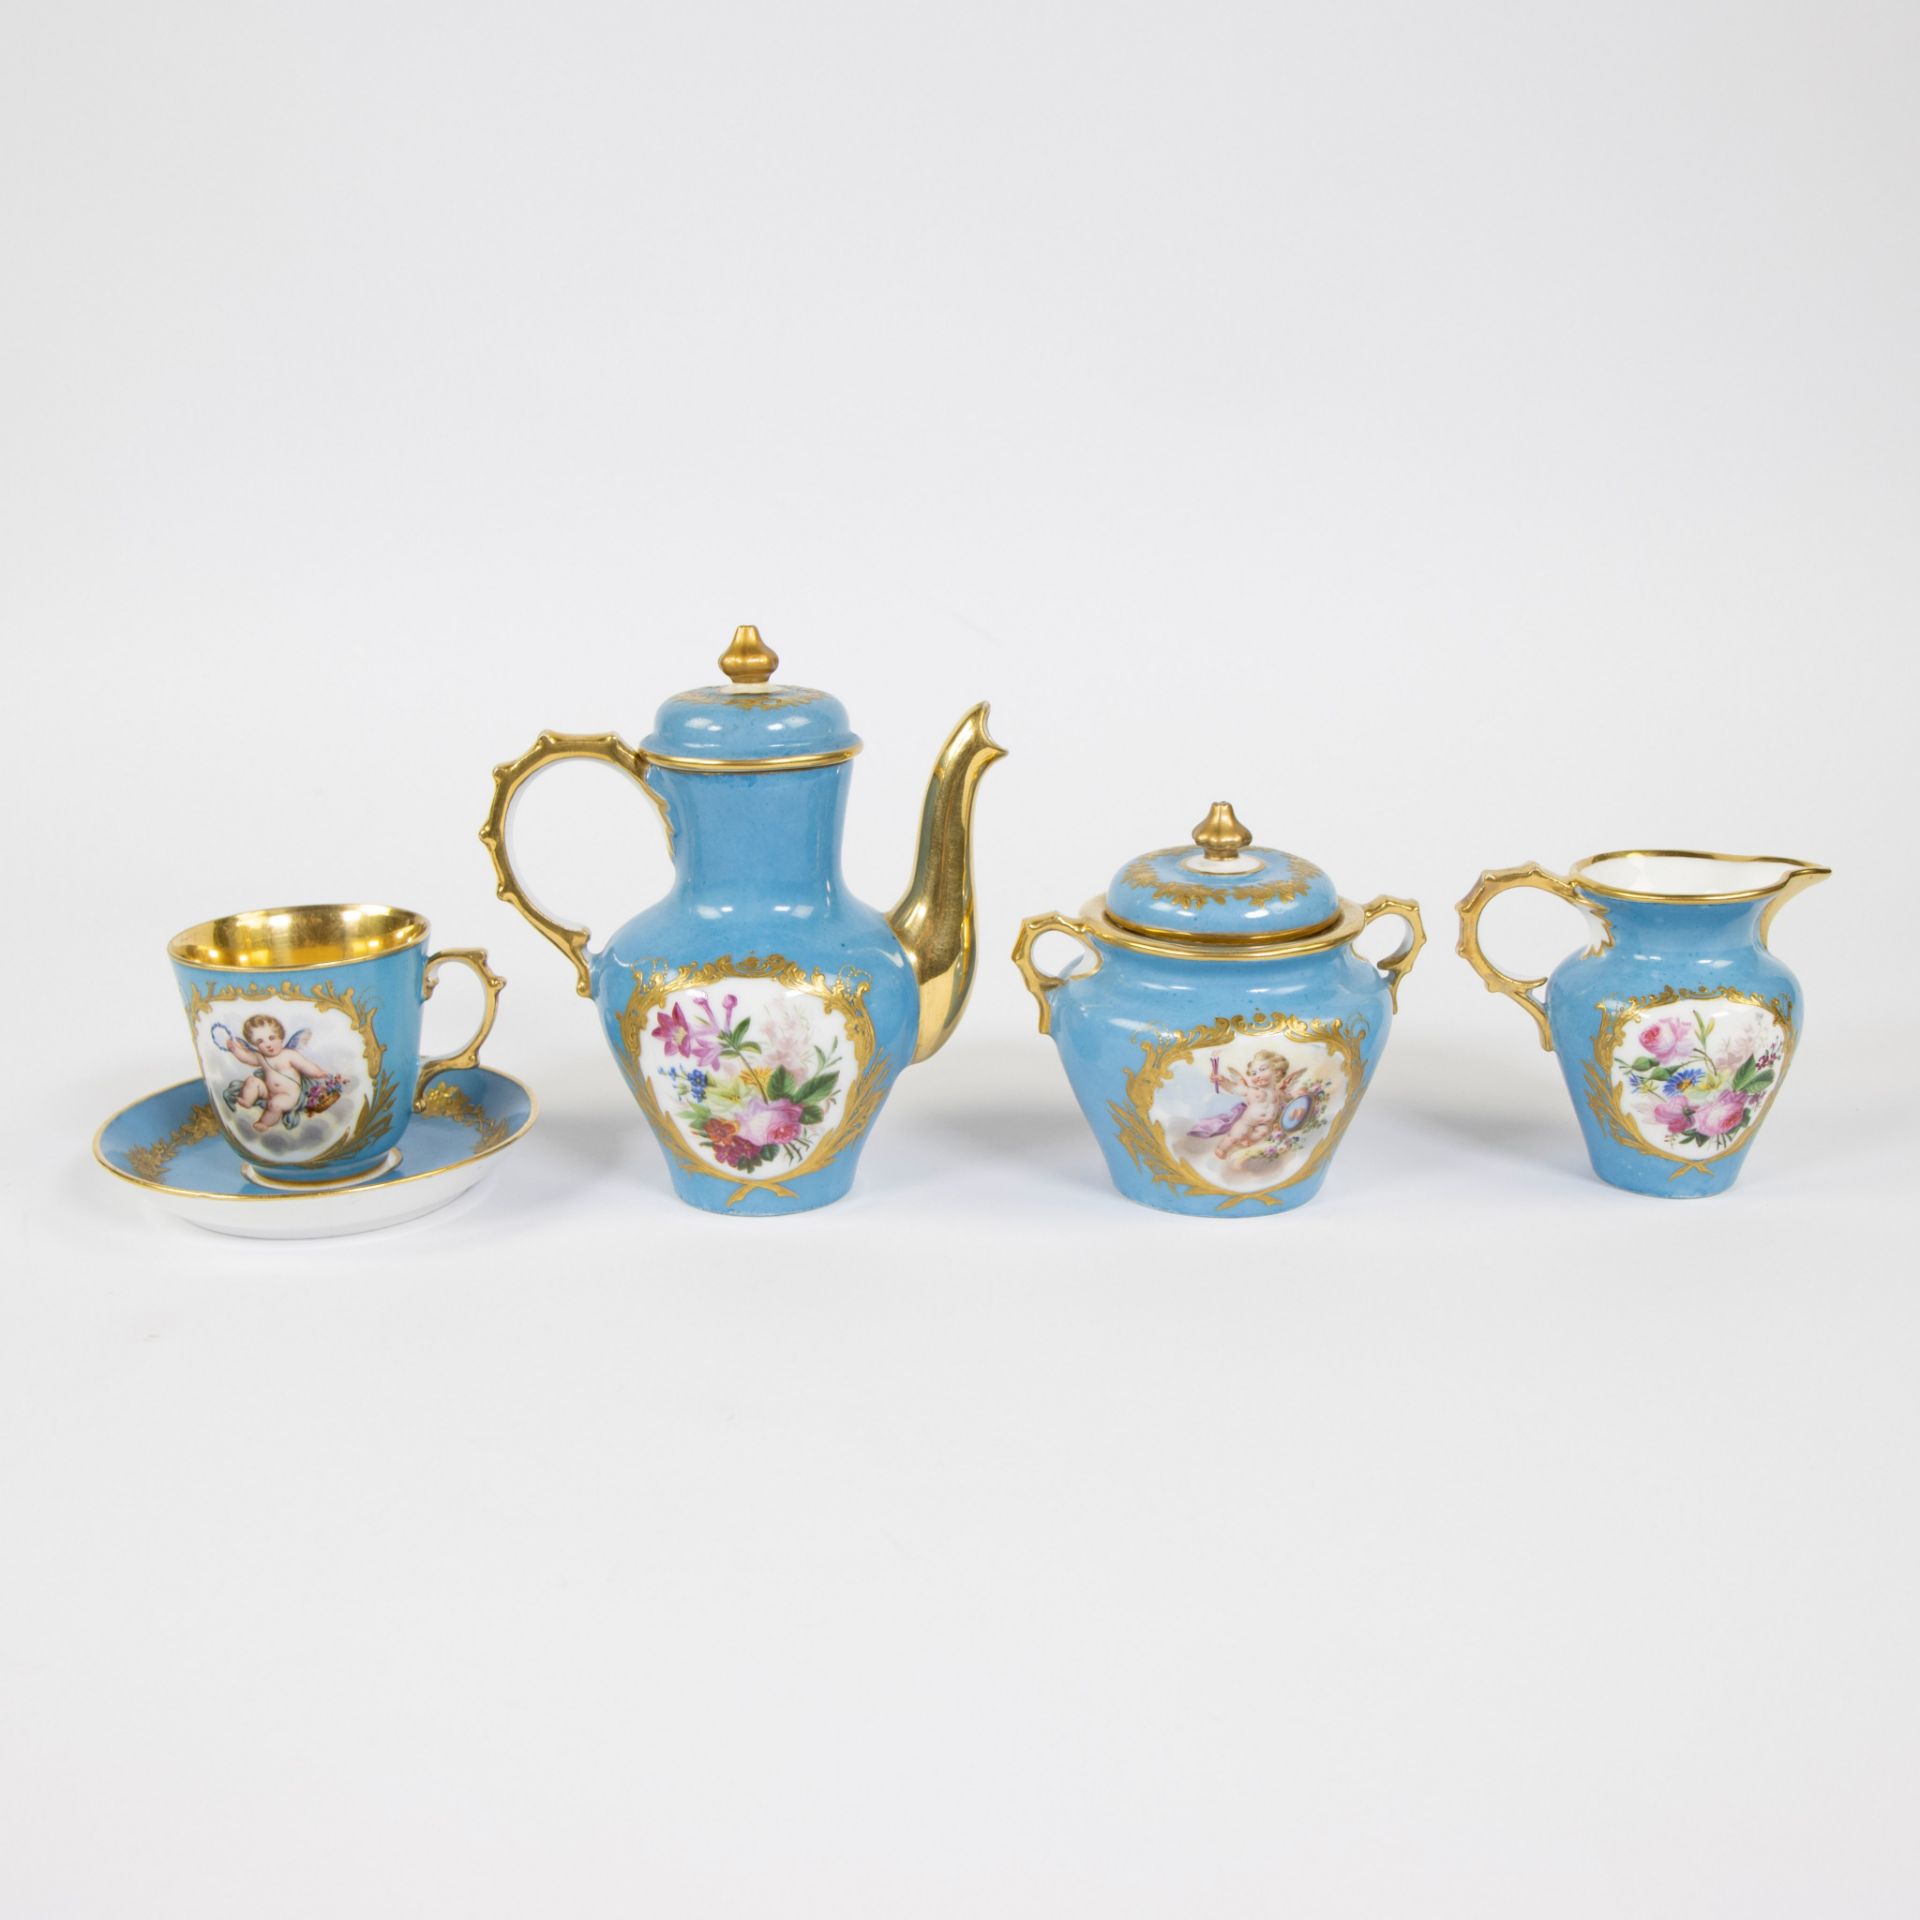 Mokka set solitaire or égoïste in porcelain decorated with cherubs and gold painting, Paris ca 1850